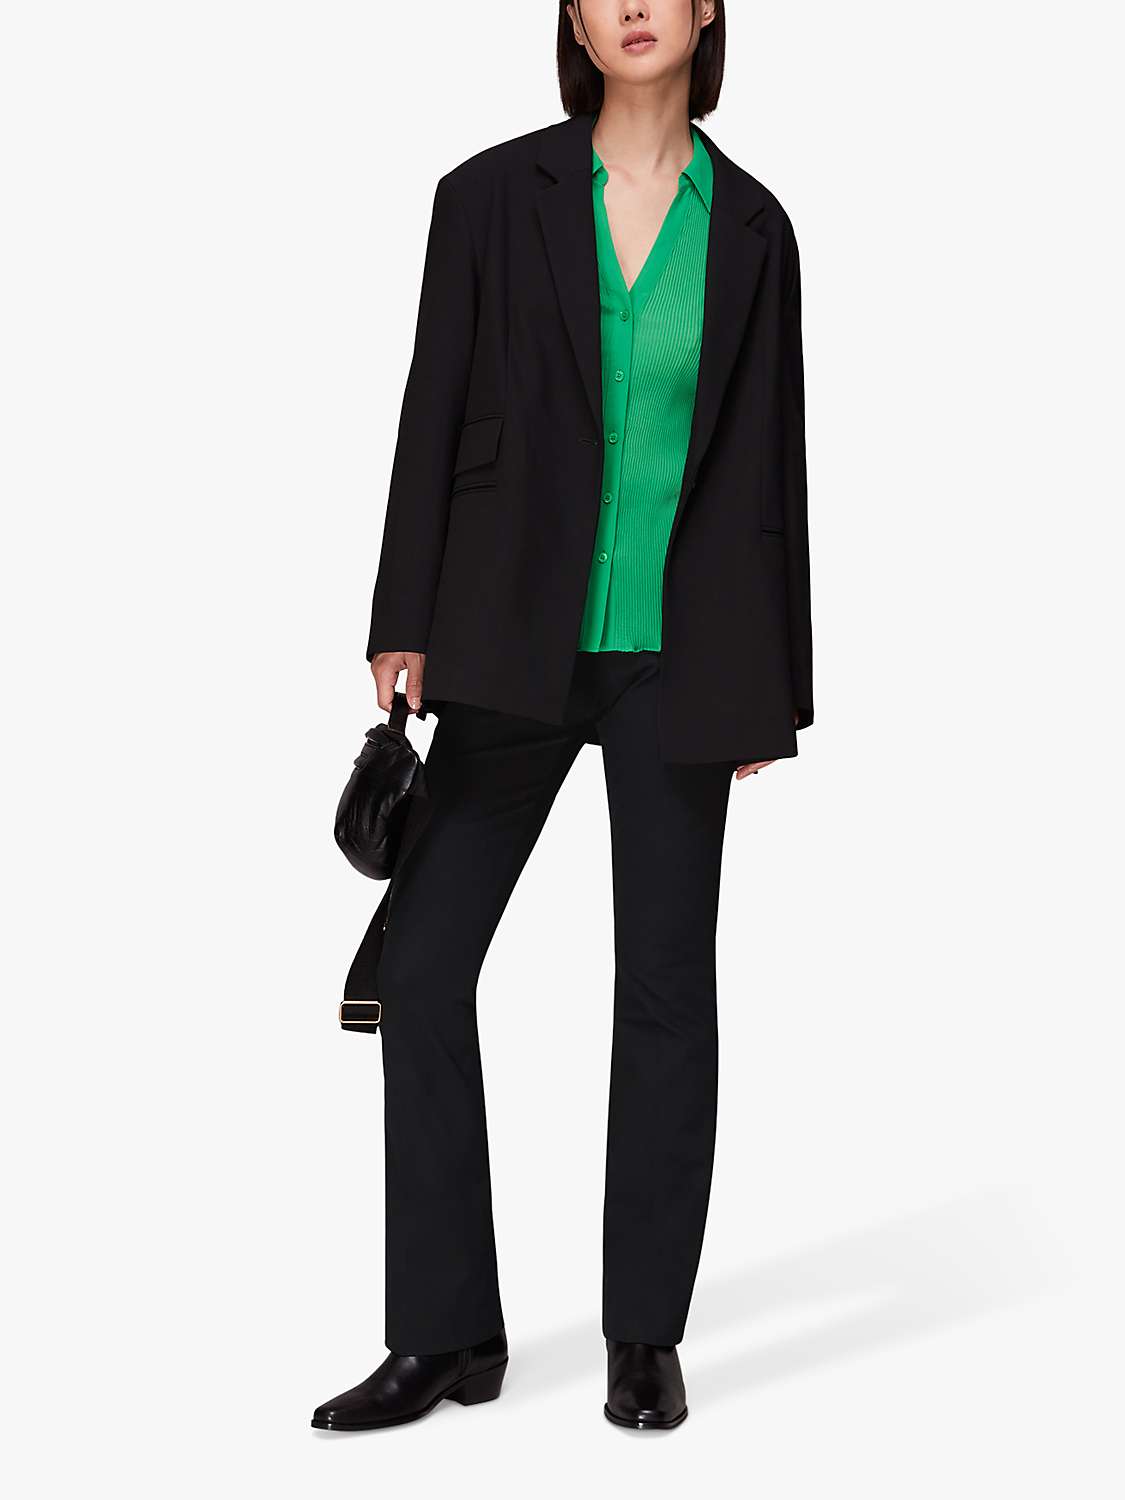 Buy Whistles Lucy Kick Flare Trousers, Black Online at johnlewis.com